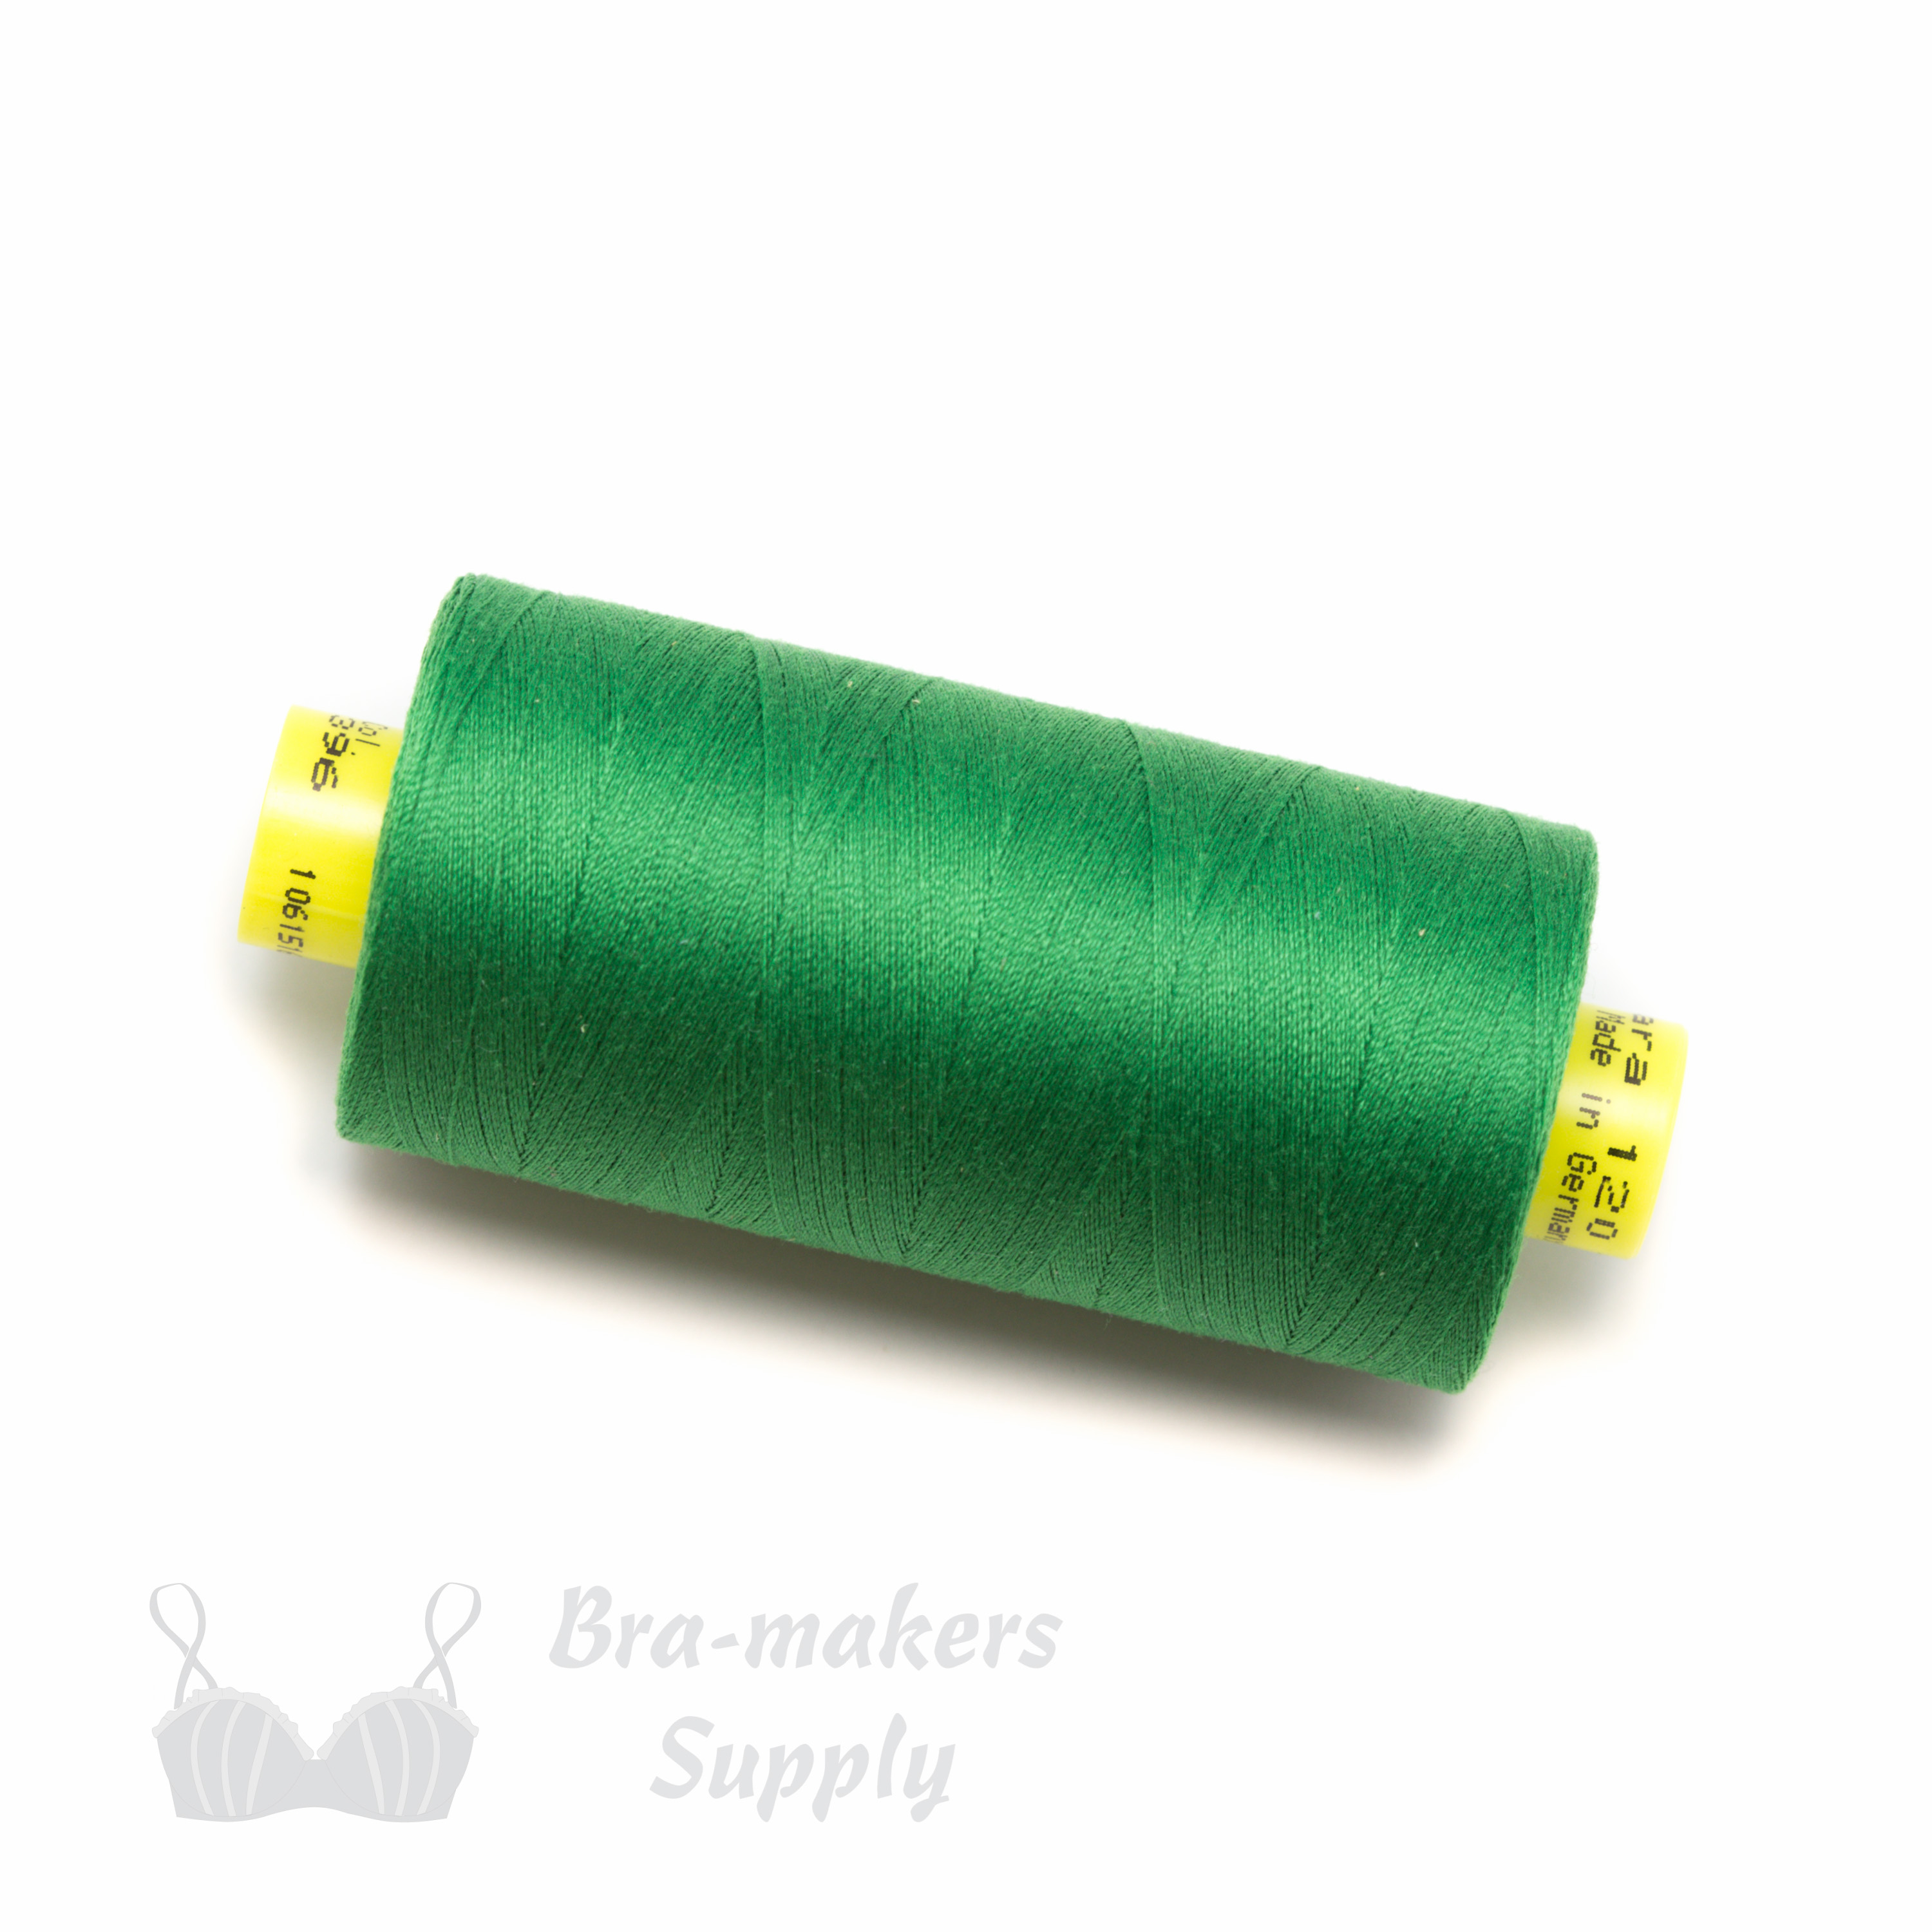 Thread Gutermann 22 – Green's Sewing and Vacuum